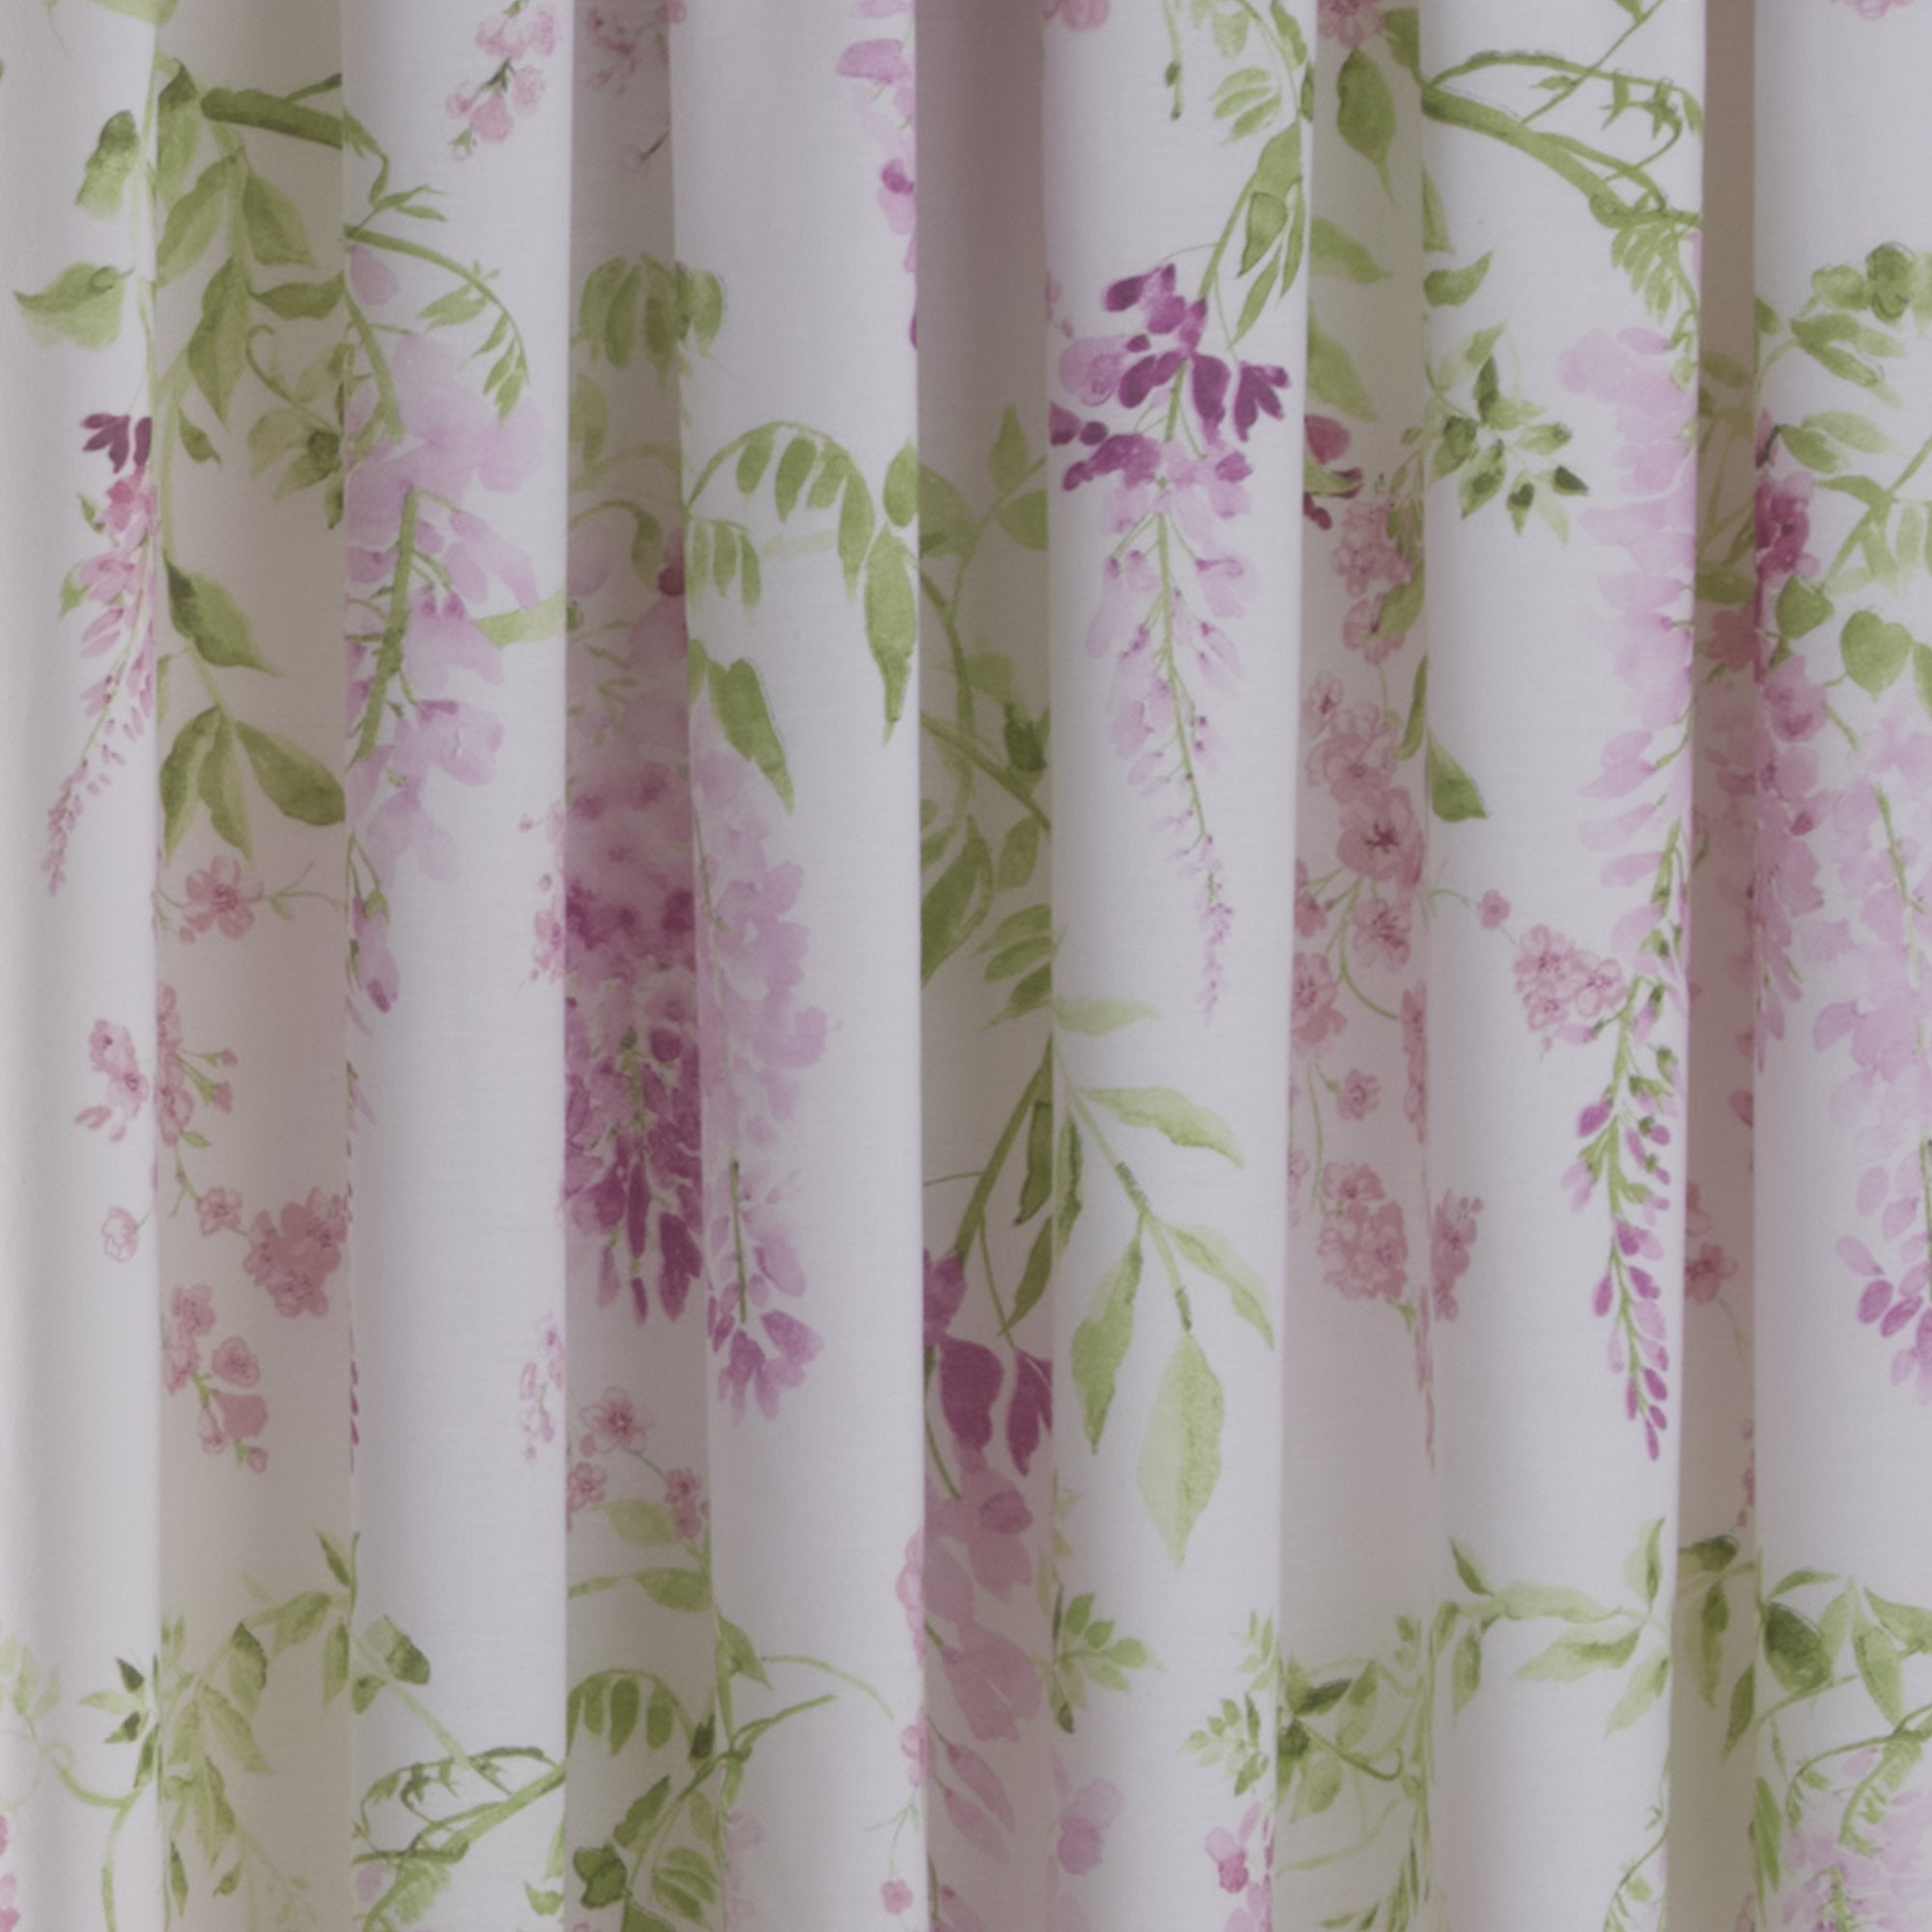 Pair of Pencil Pleat Curtains With Tie-Backs Wisteria by Dreams & Drapes Design in Pink